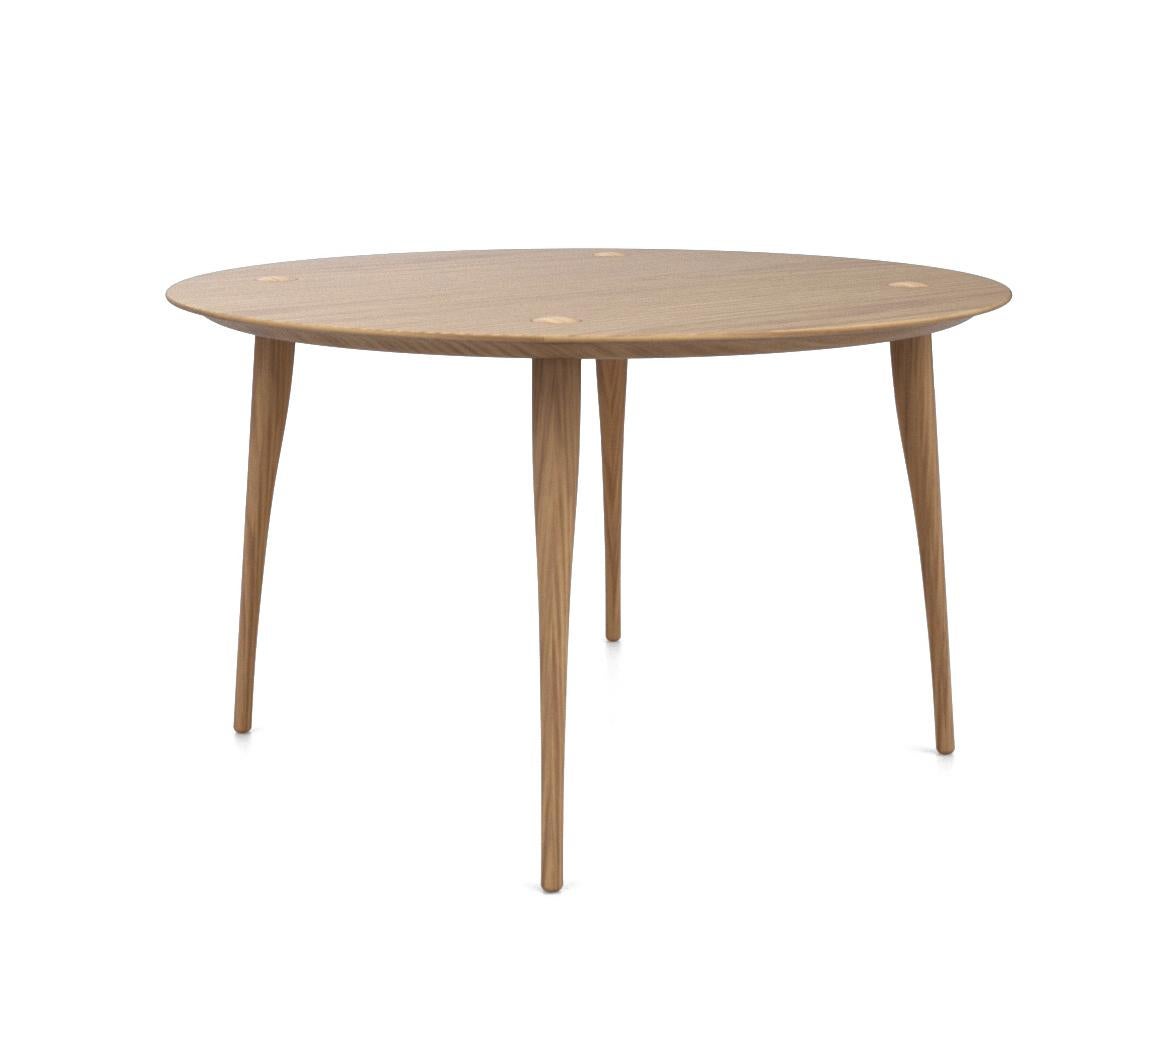 Dining at a Lewes dining table is one of the pleasures in life. We sit down with a glass of wine at a gently curved solid wood table. The wooden frame underneath the surface has 4 organic shaped legs which protrude elegantly through the surface of